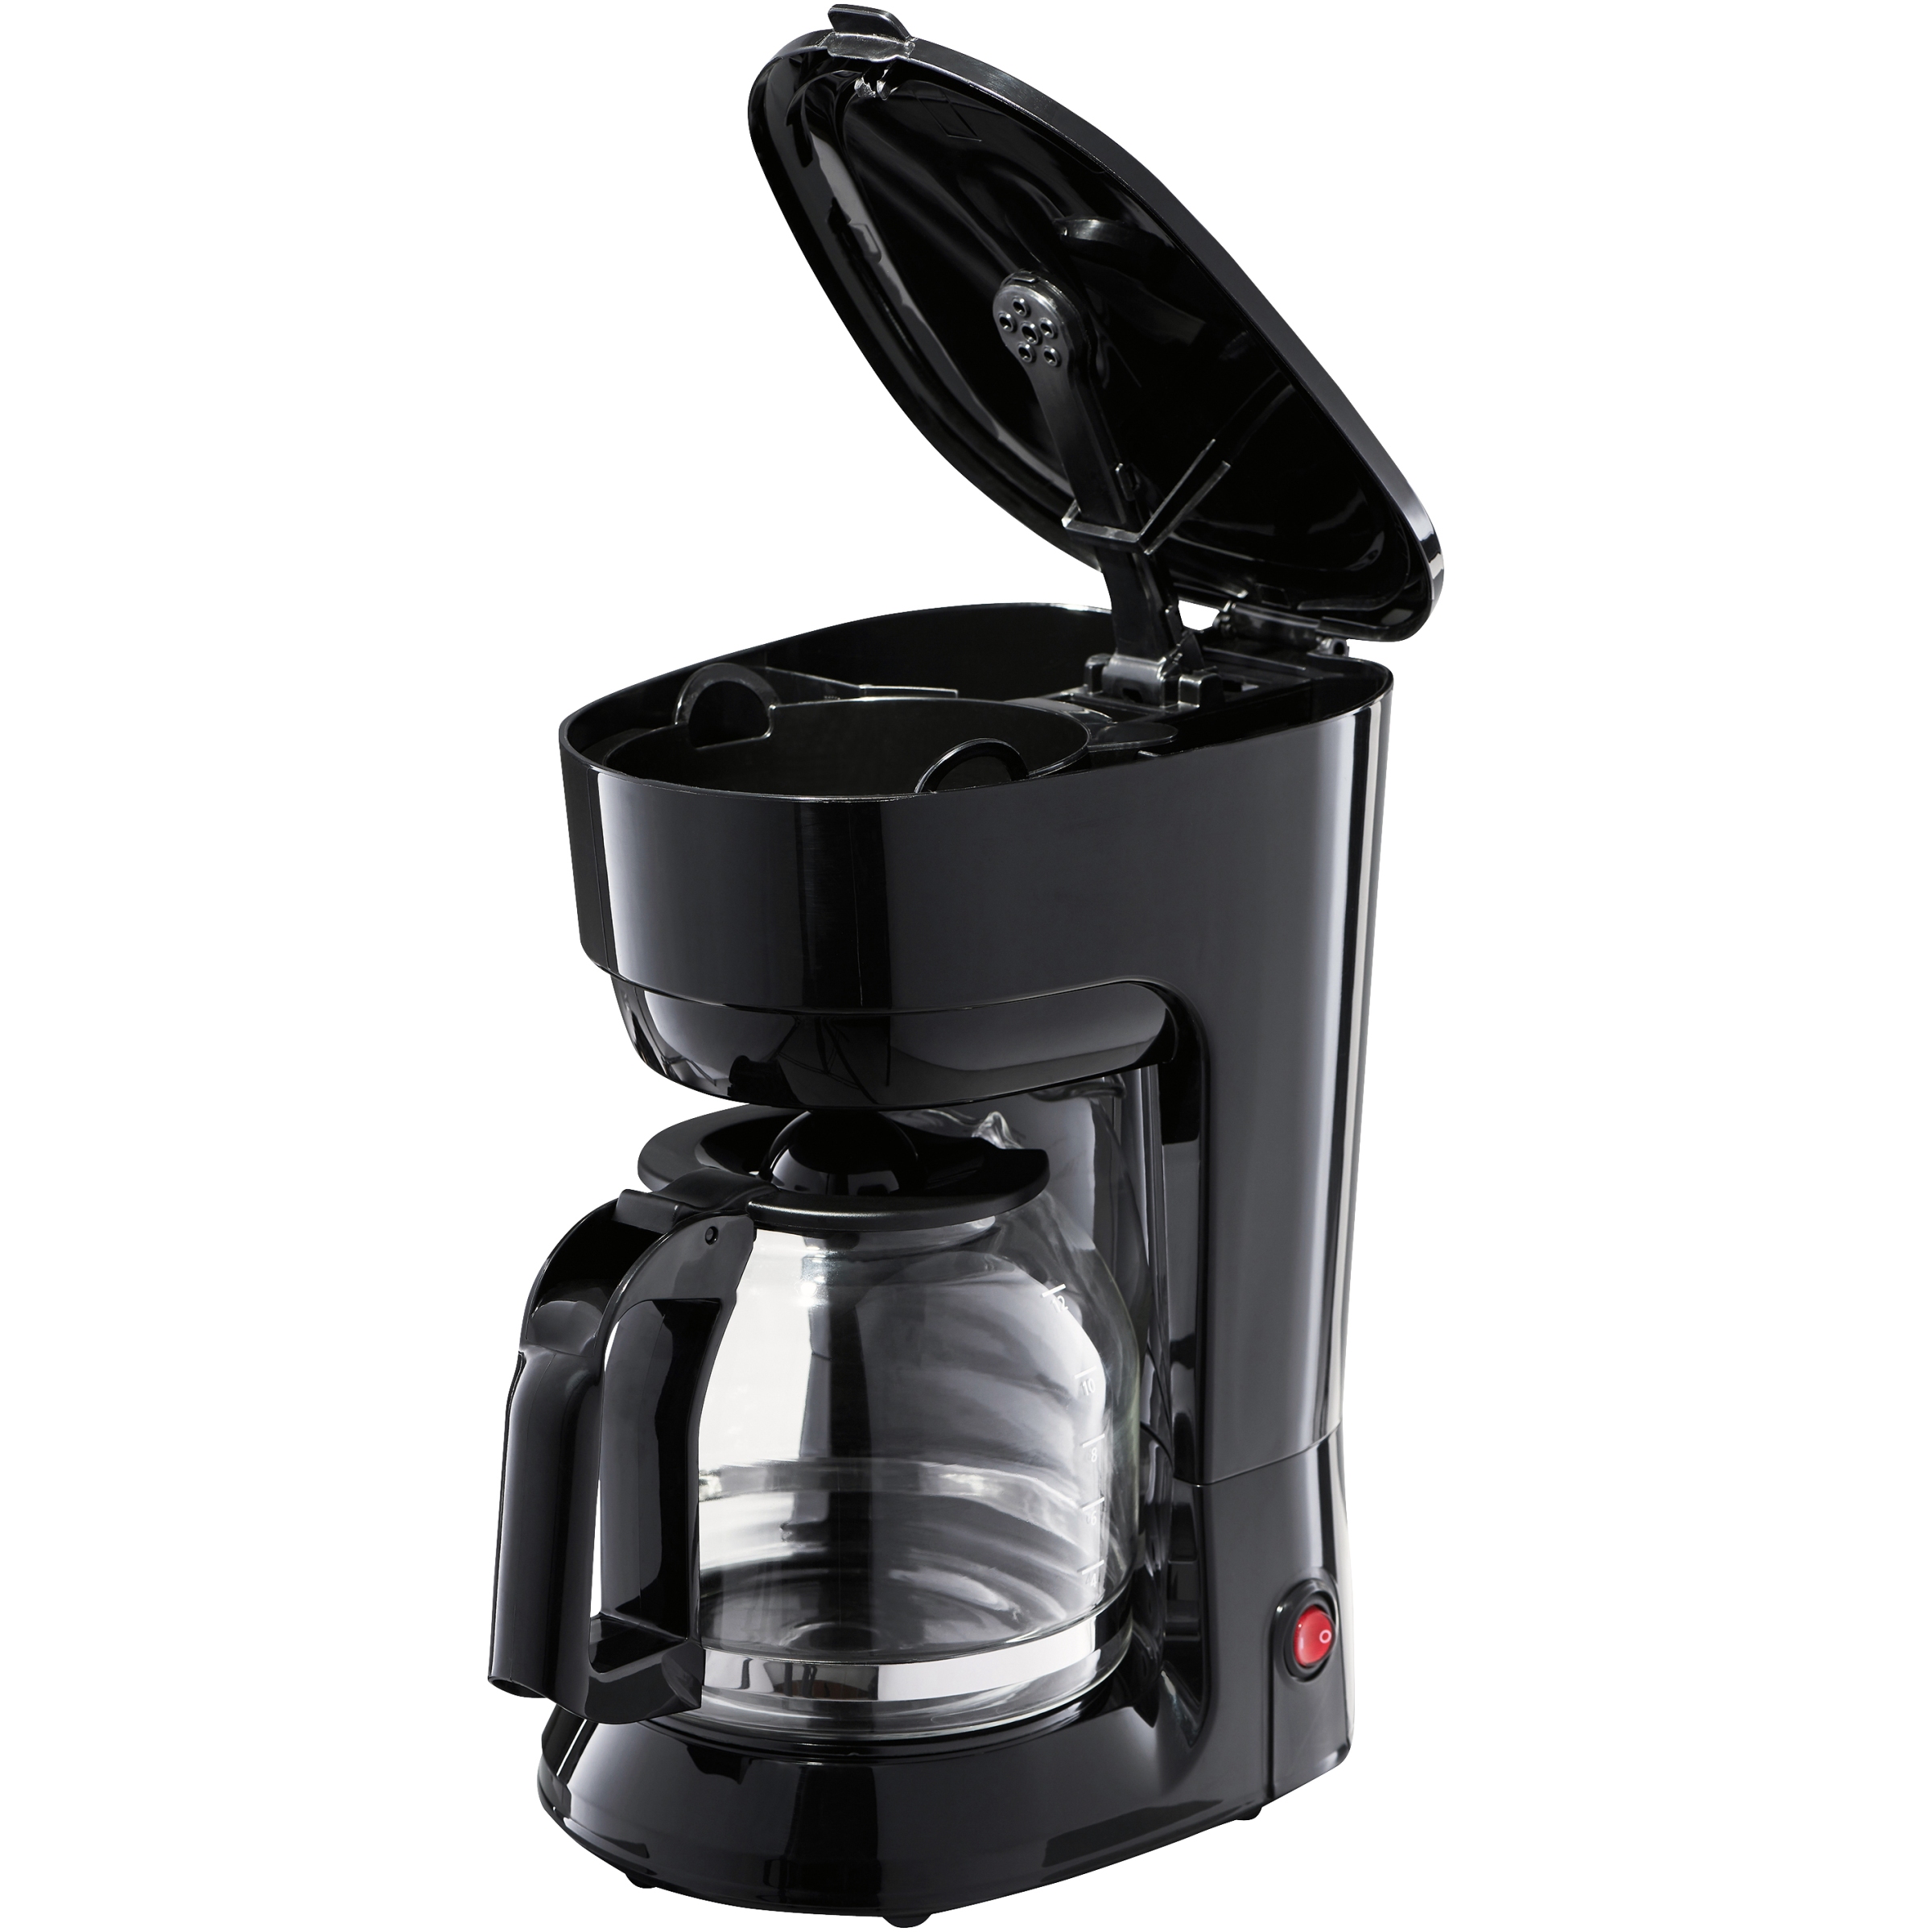 Mainstays Black 12-Cup Coffee Maker with Removable Filter Basket - image 4 of 7